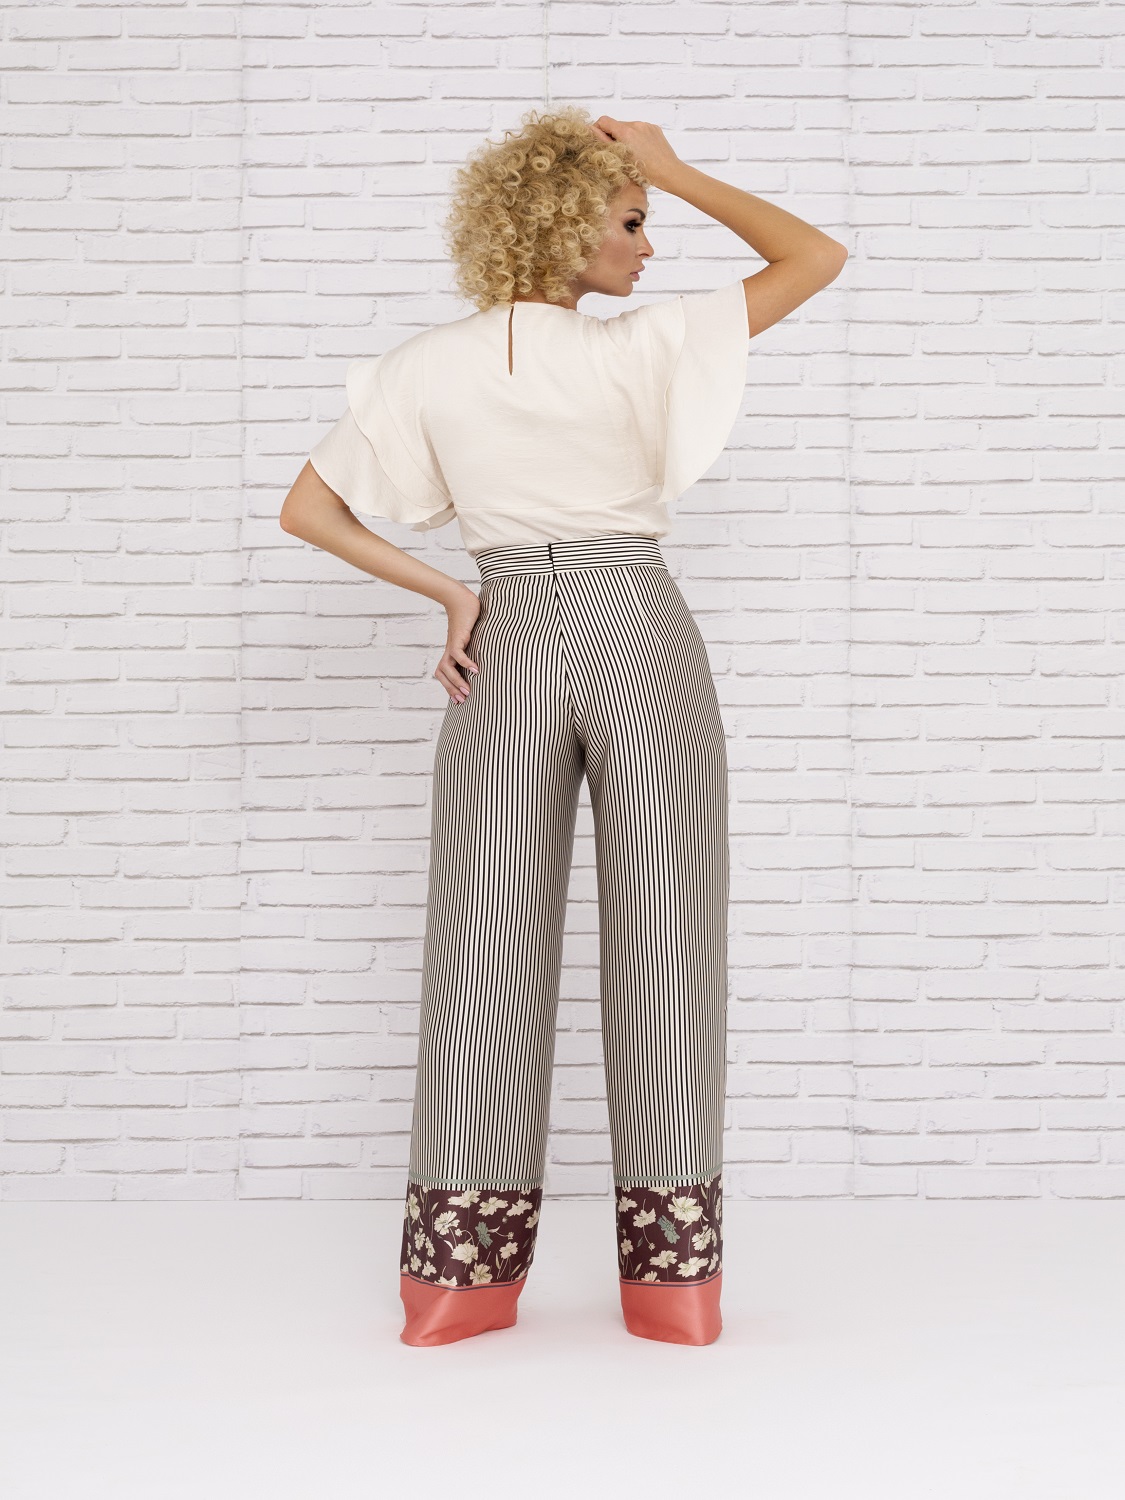 Set of trousers for the summer season 2020